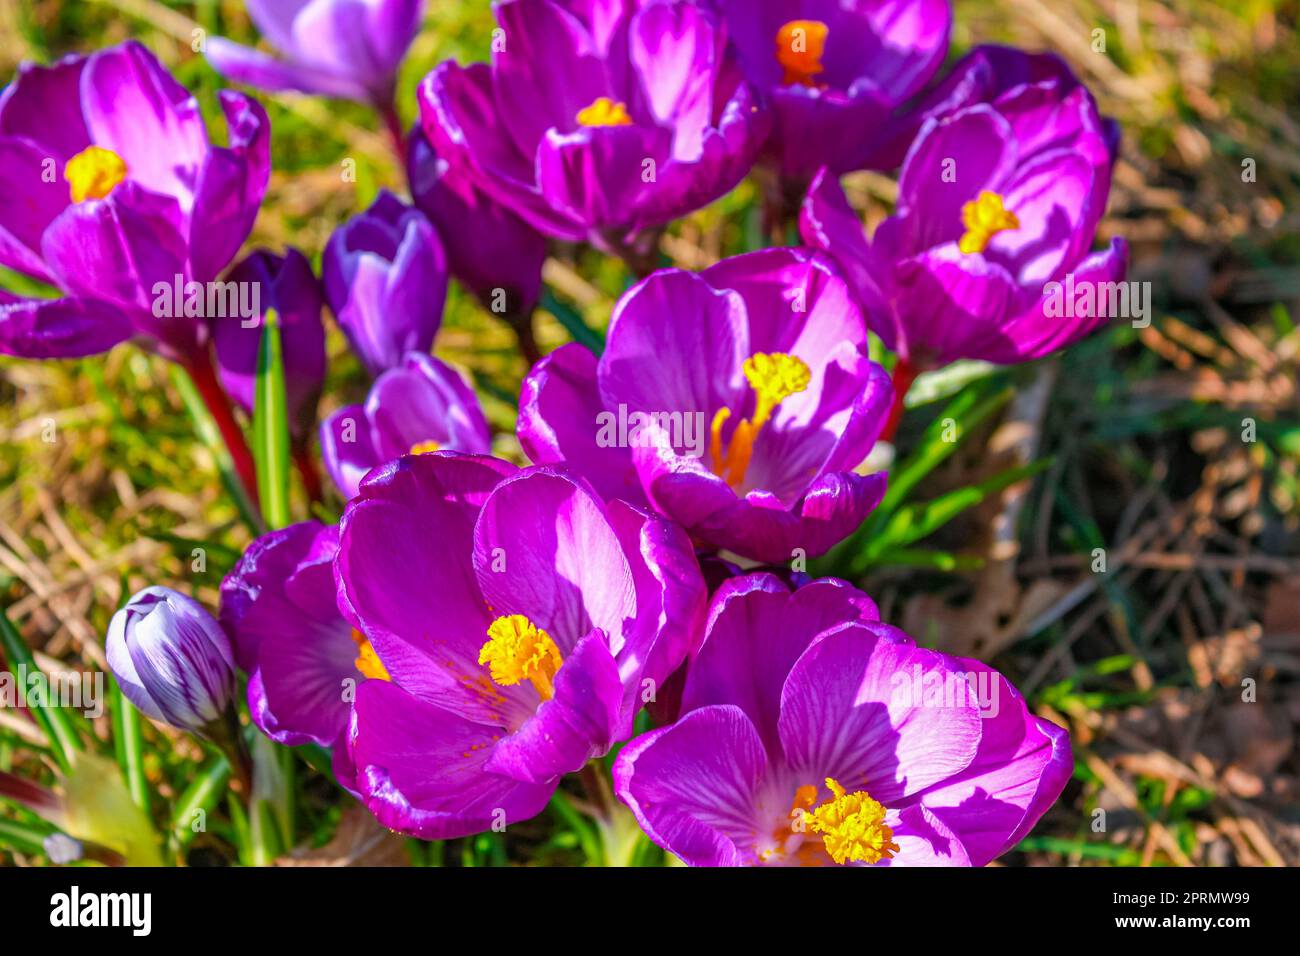 Crocus on the forest floor with foliage and grass Germany. Stock Photo